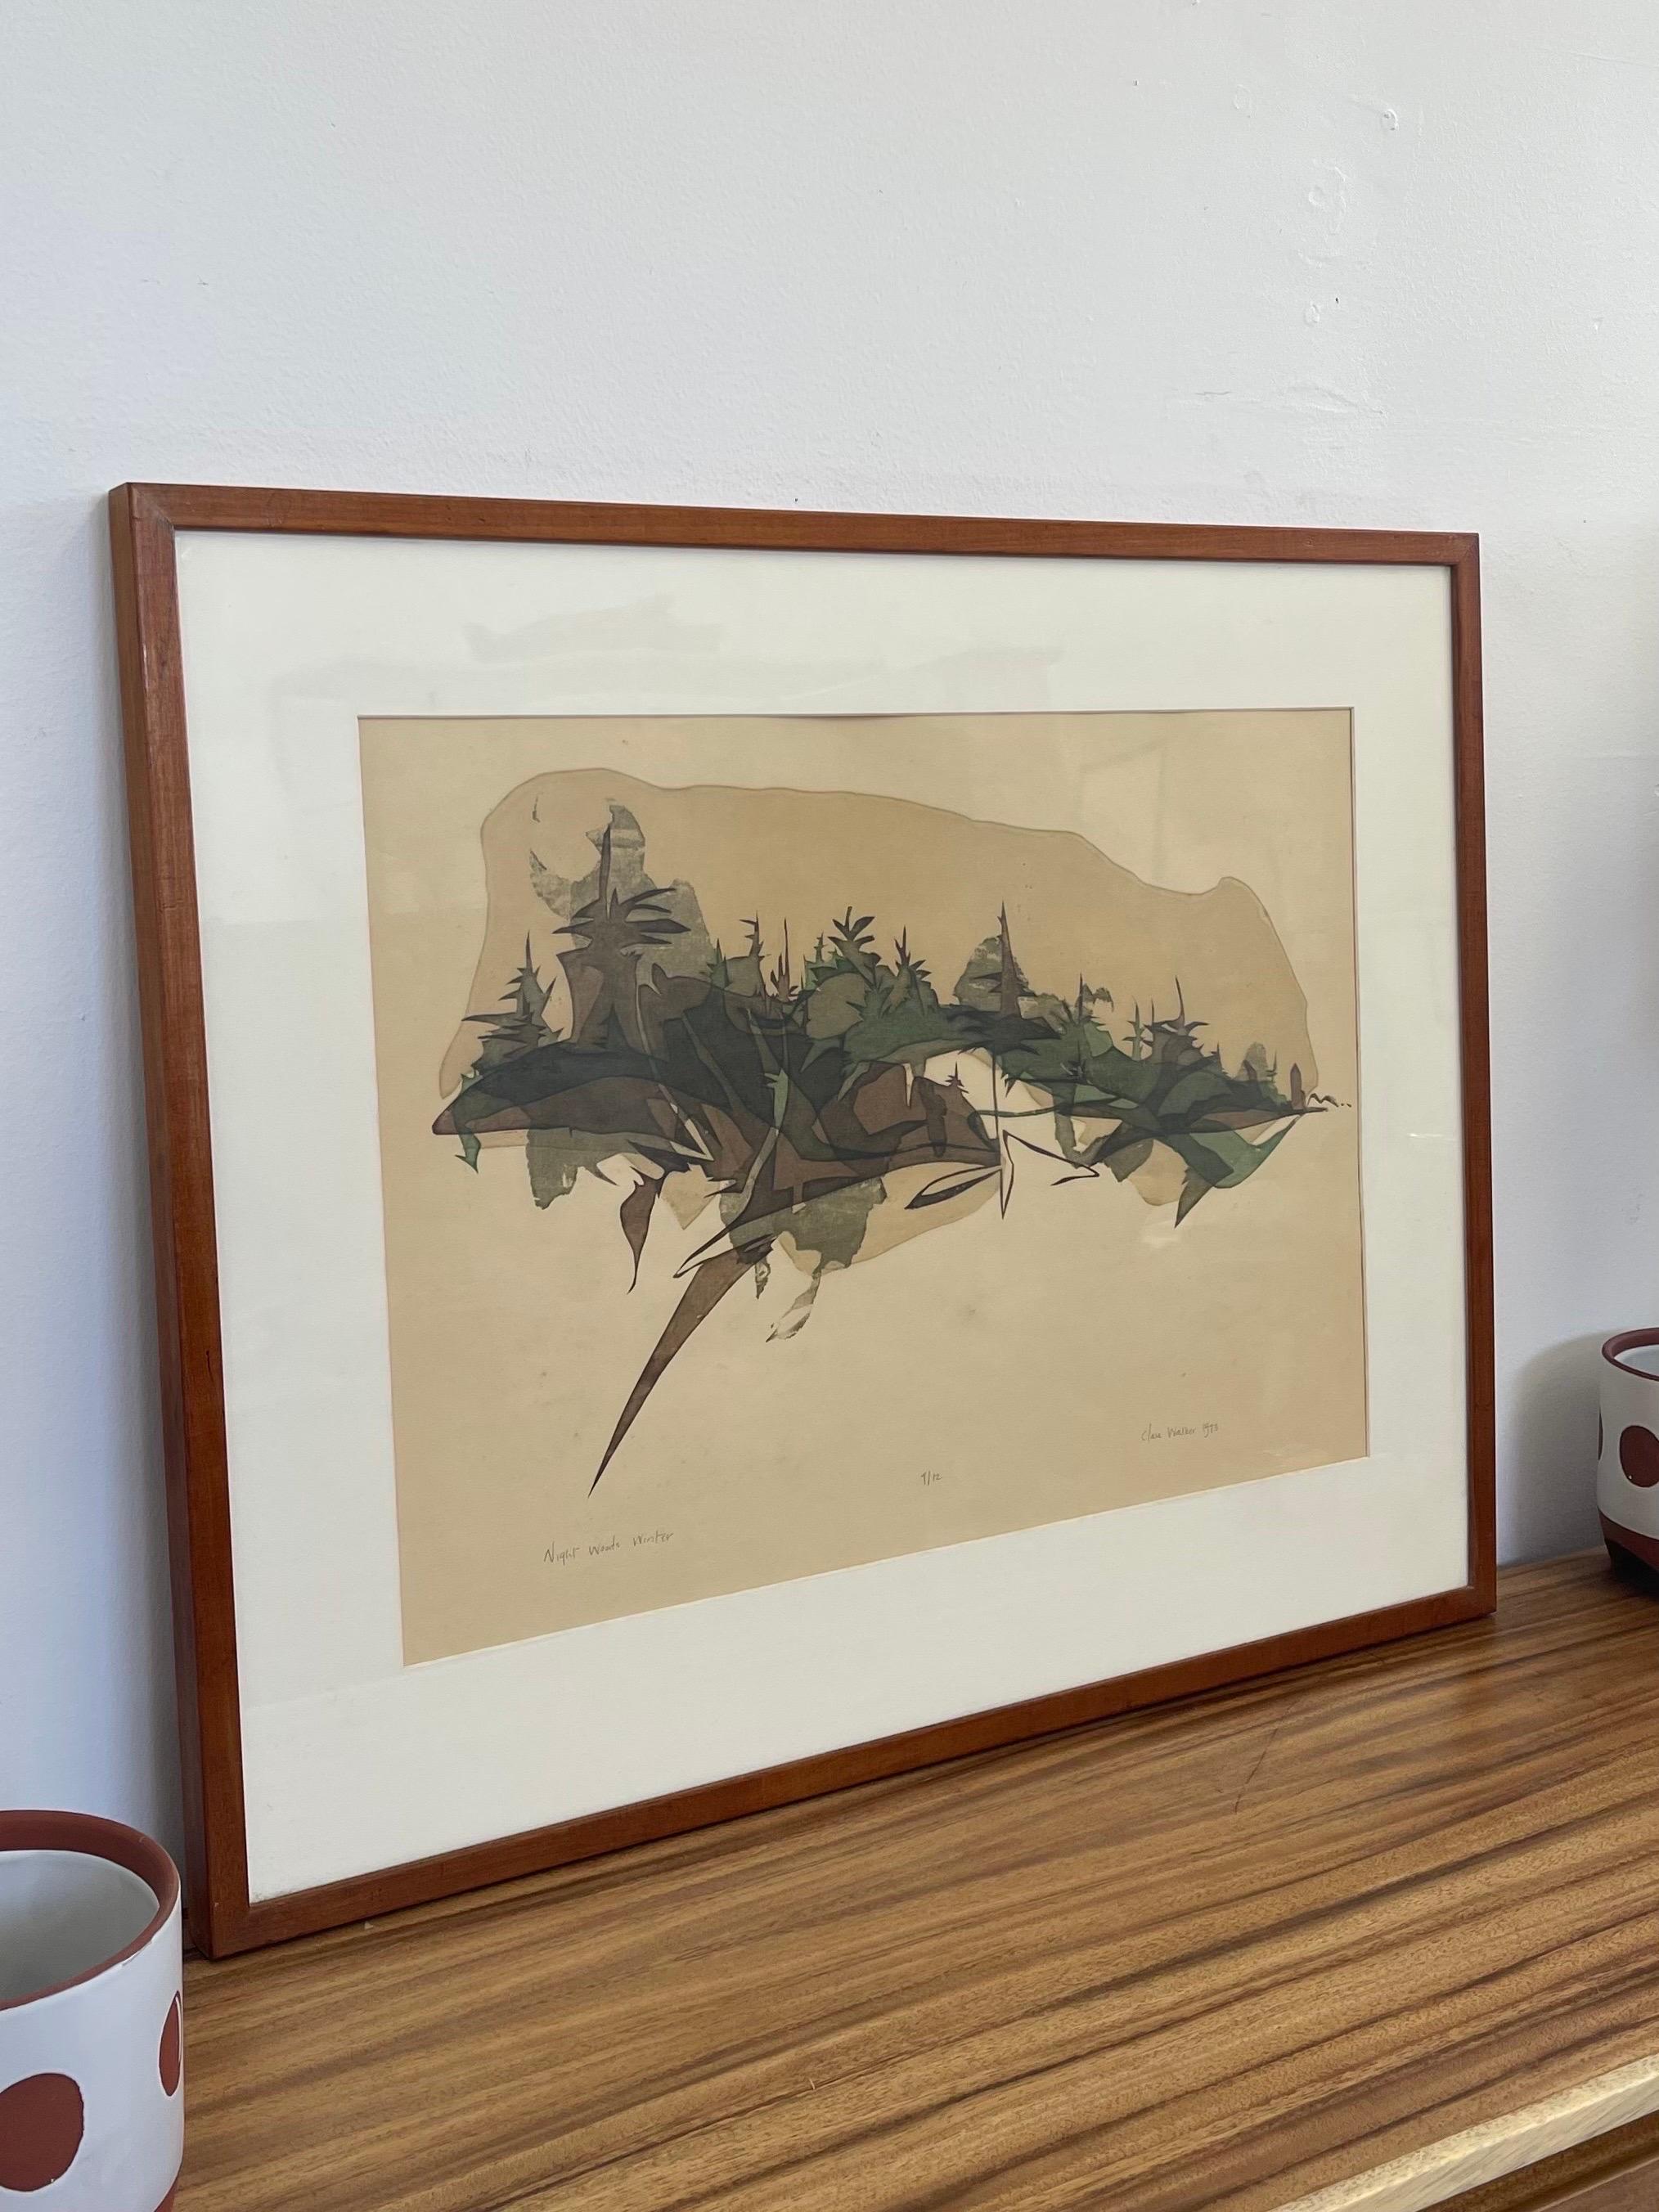 This Silkscreen Print is number 9/12 by Clare Walker. Professionally framed and matted within wooden framing. Abstract Forest Landscape Art. Vintage Condition Consistent with Age as Pictured.

Dimensions. 29 W ; 1/2 D ; 24 H